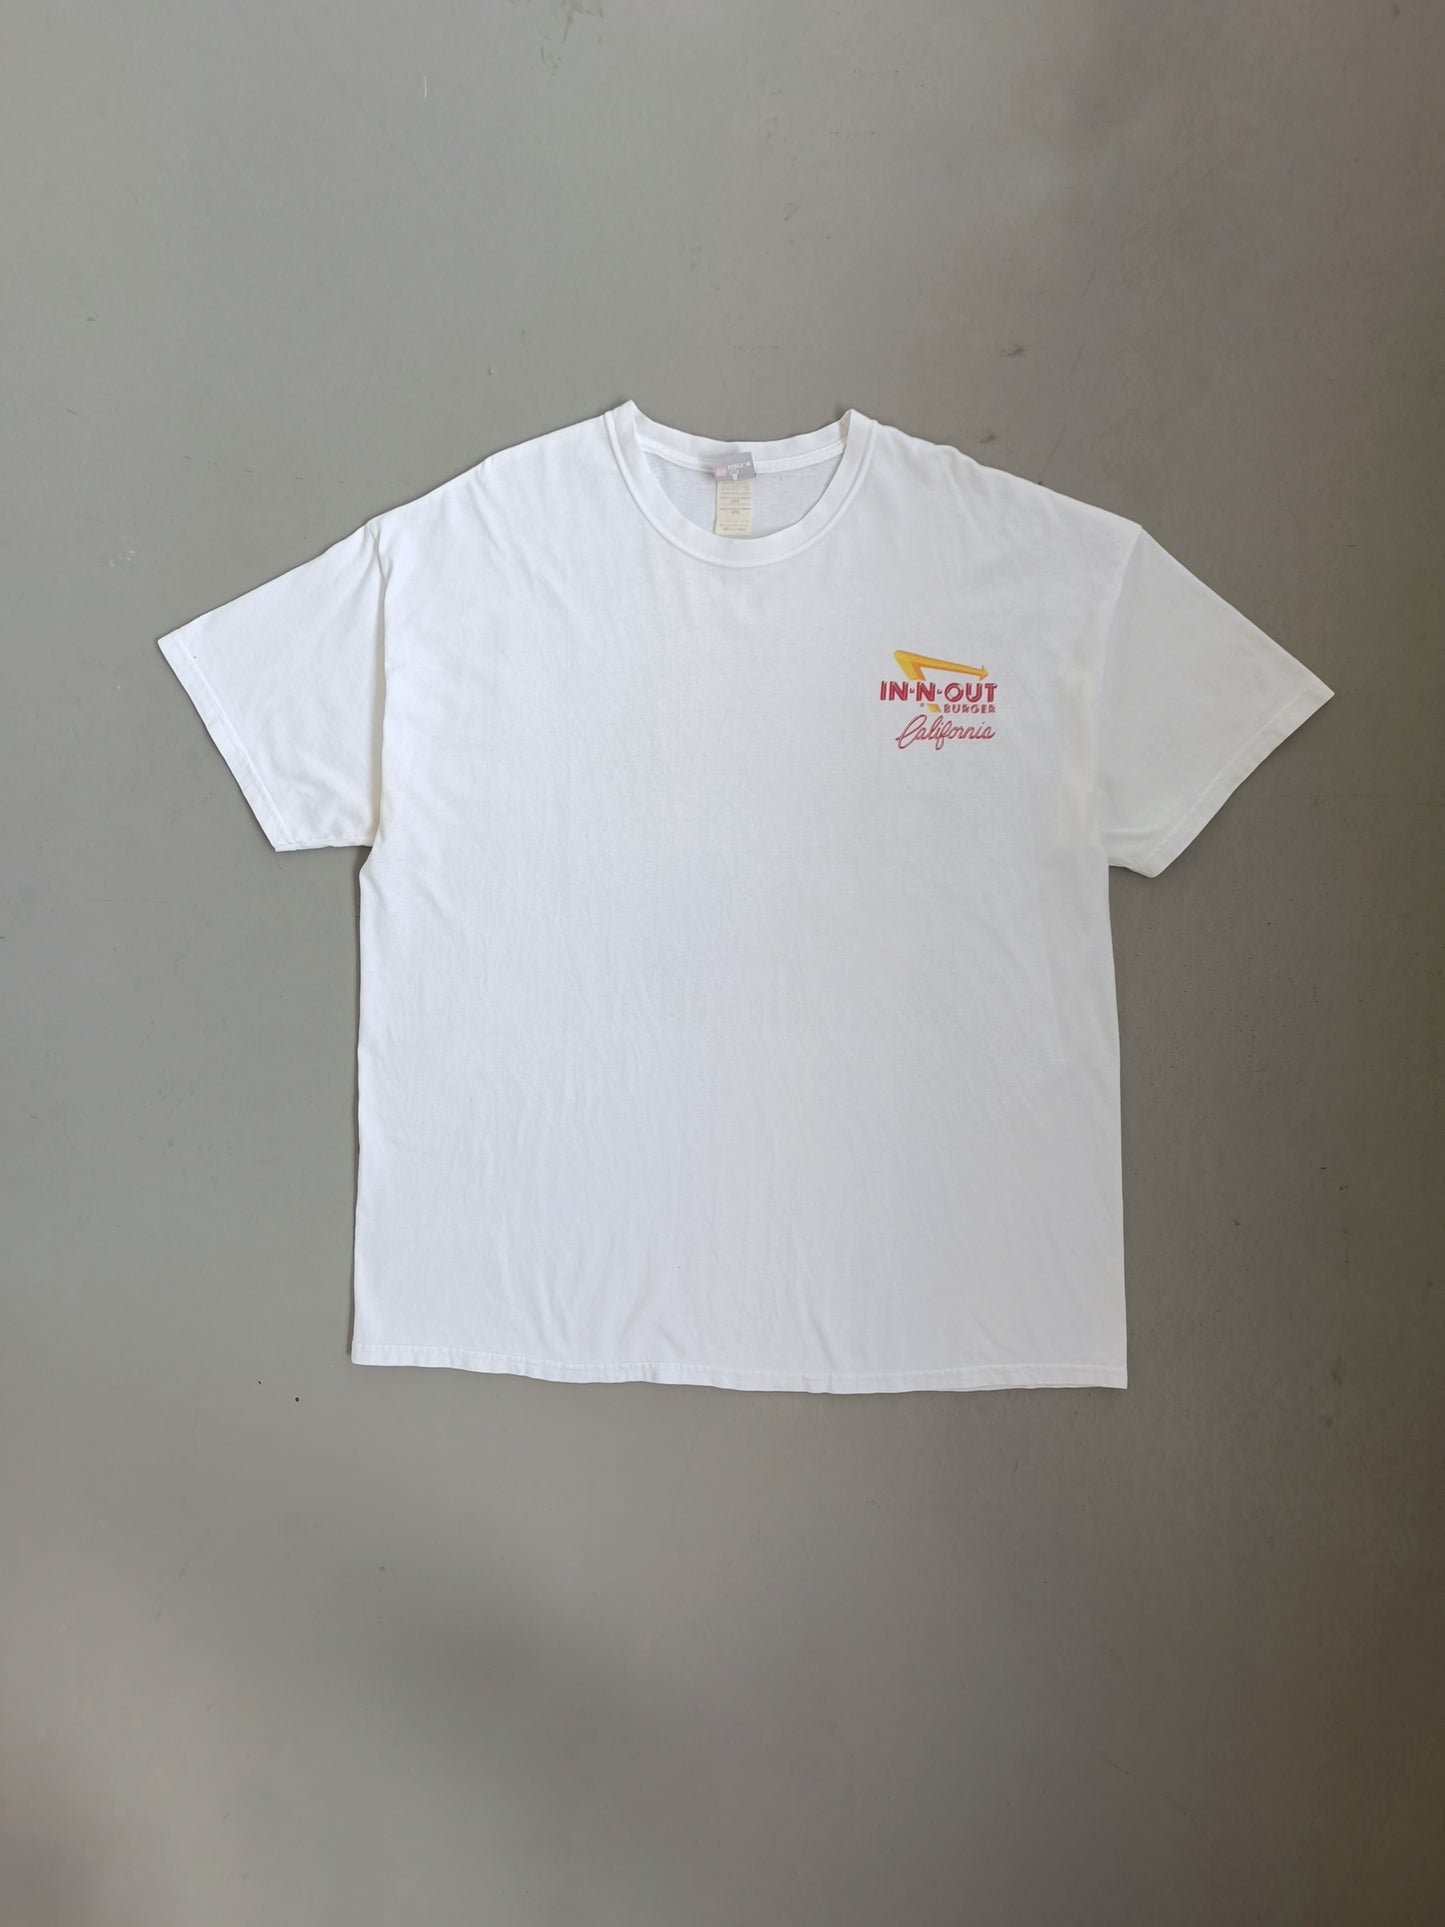 In and Out California - 2XL